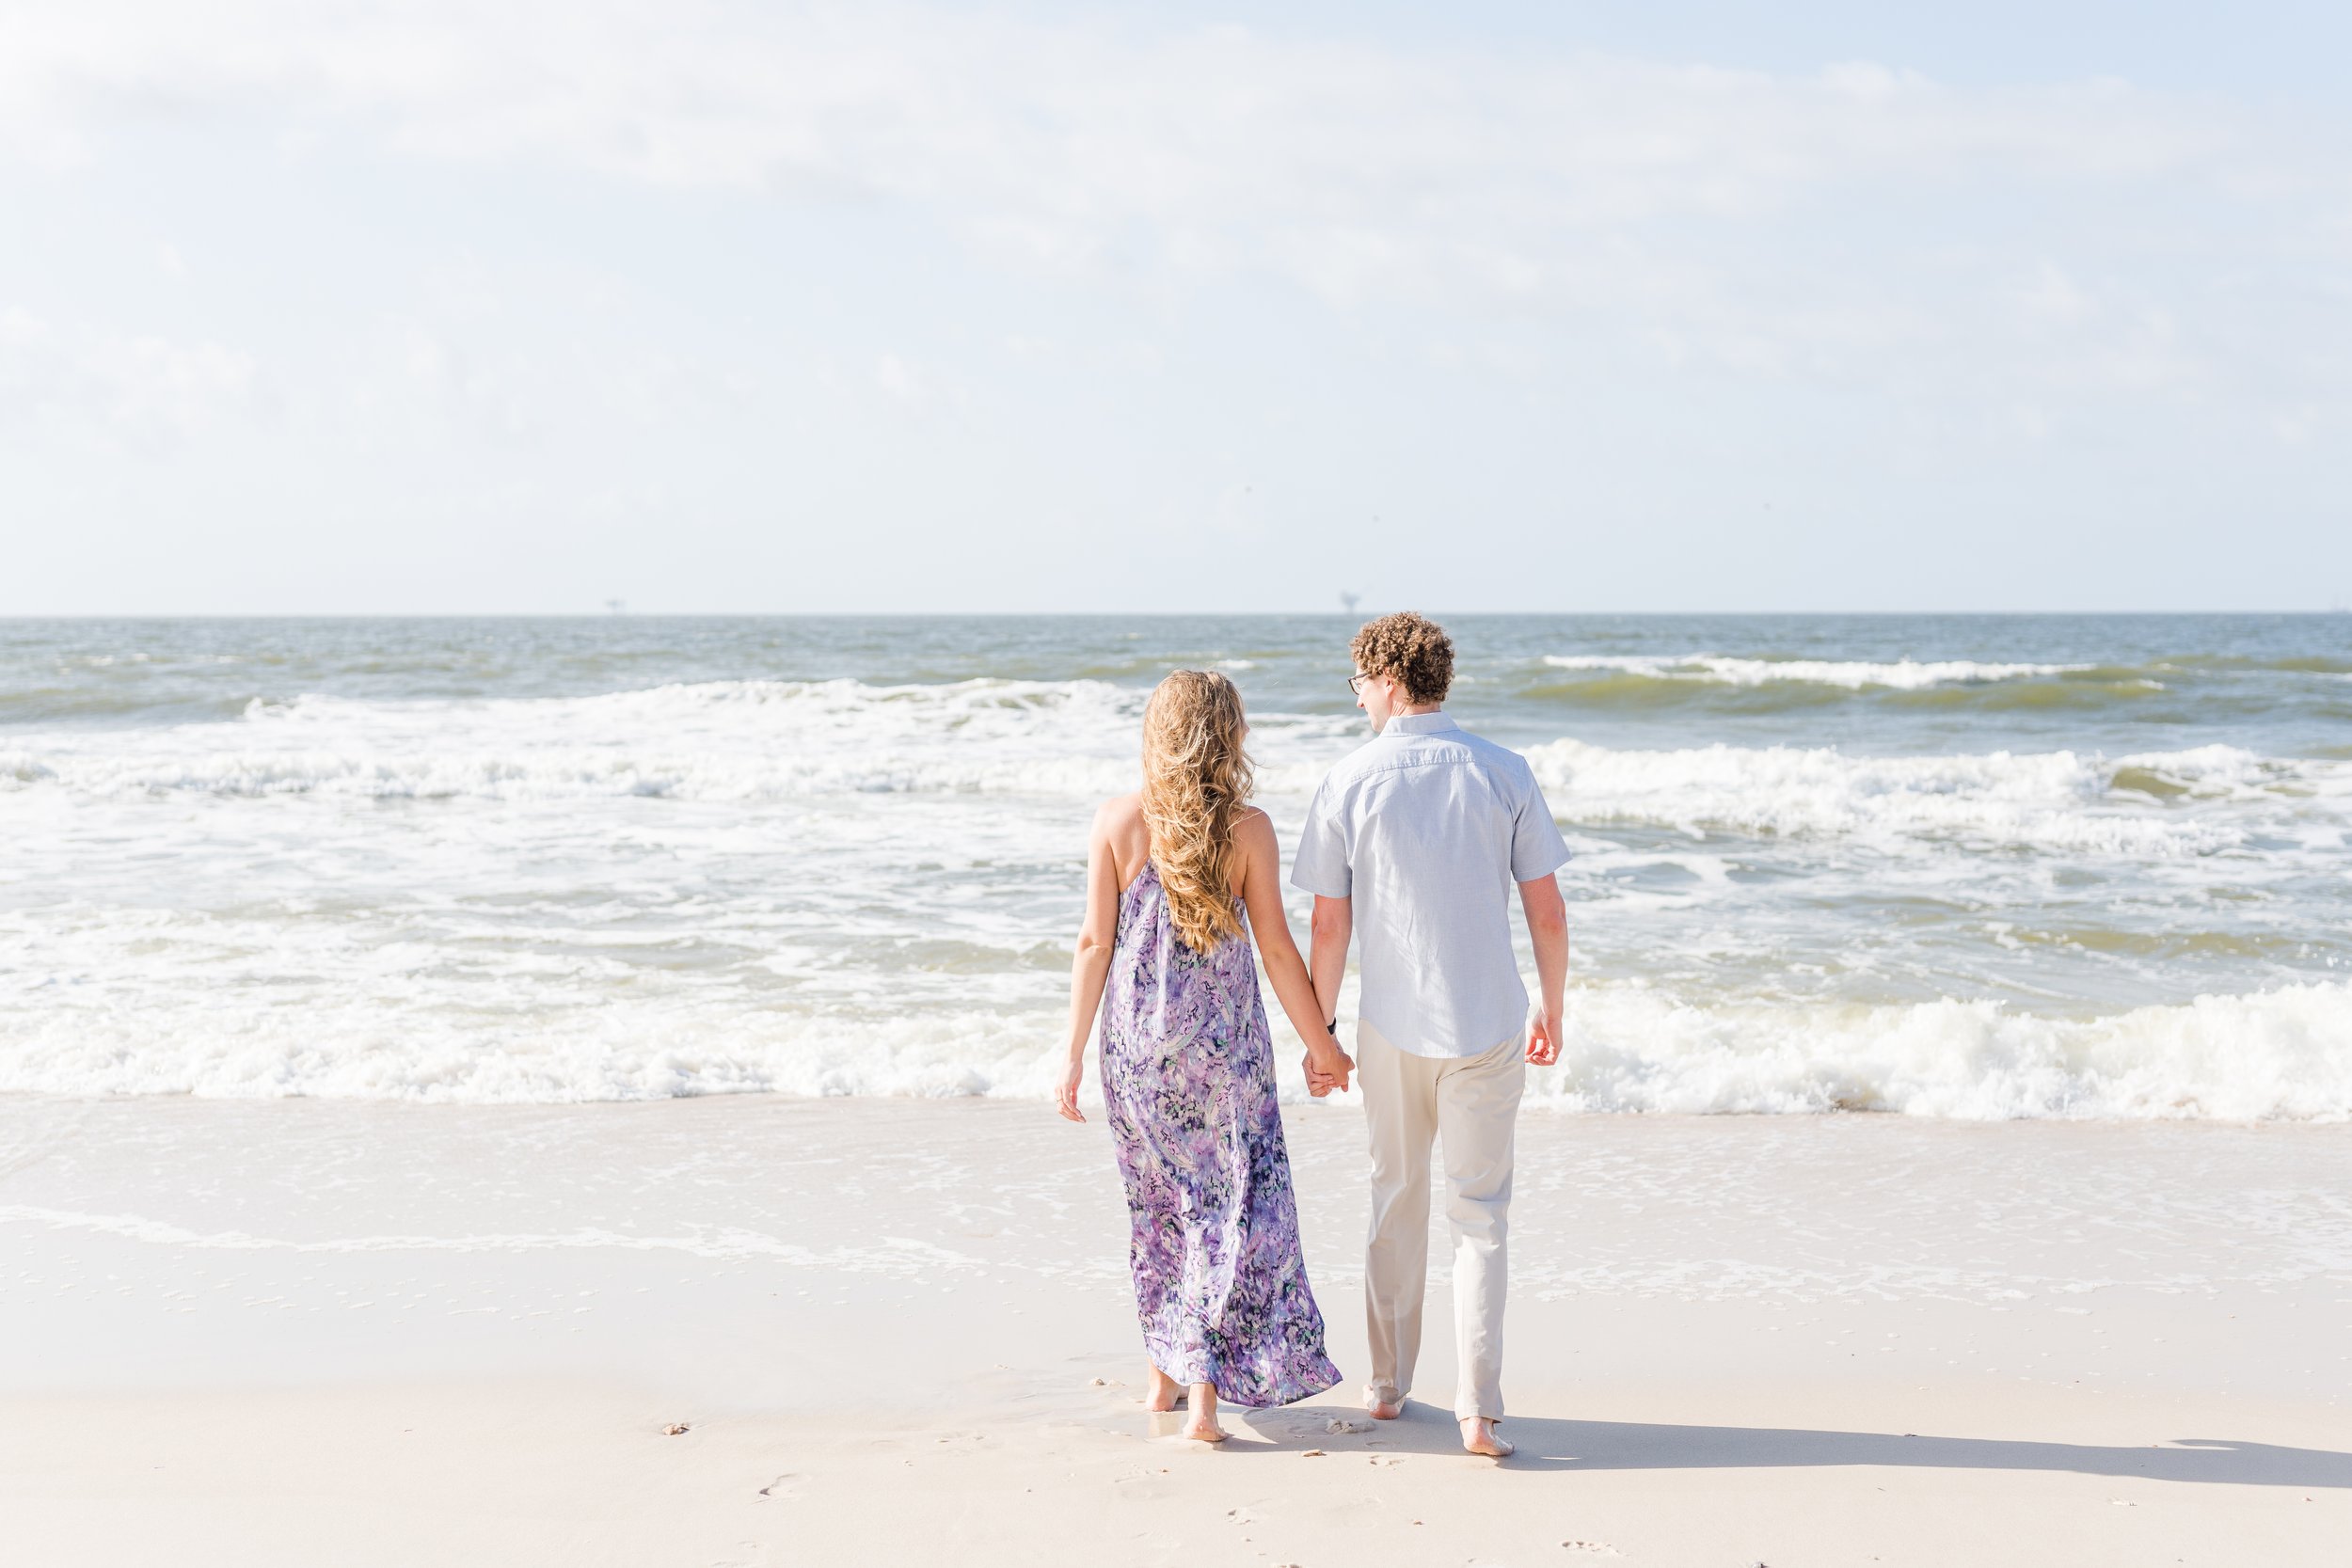 Dauphin Island Engagement Session Photographed by Kristen Marcus PhotographyDauphin Island Engagement Session Photographed by Kristen Marcus Photography